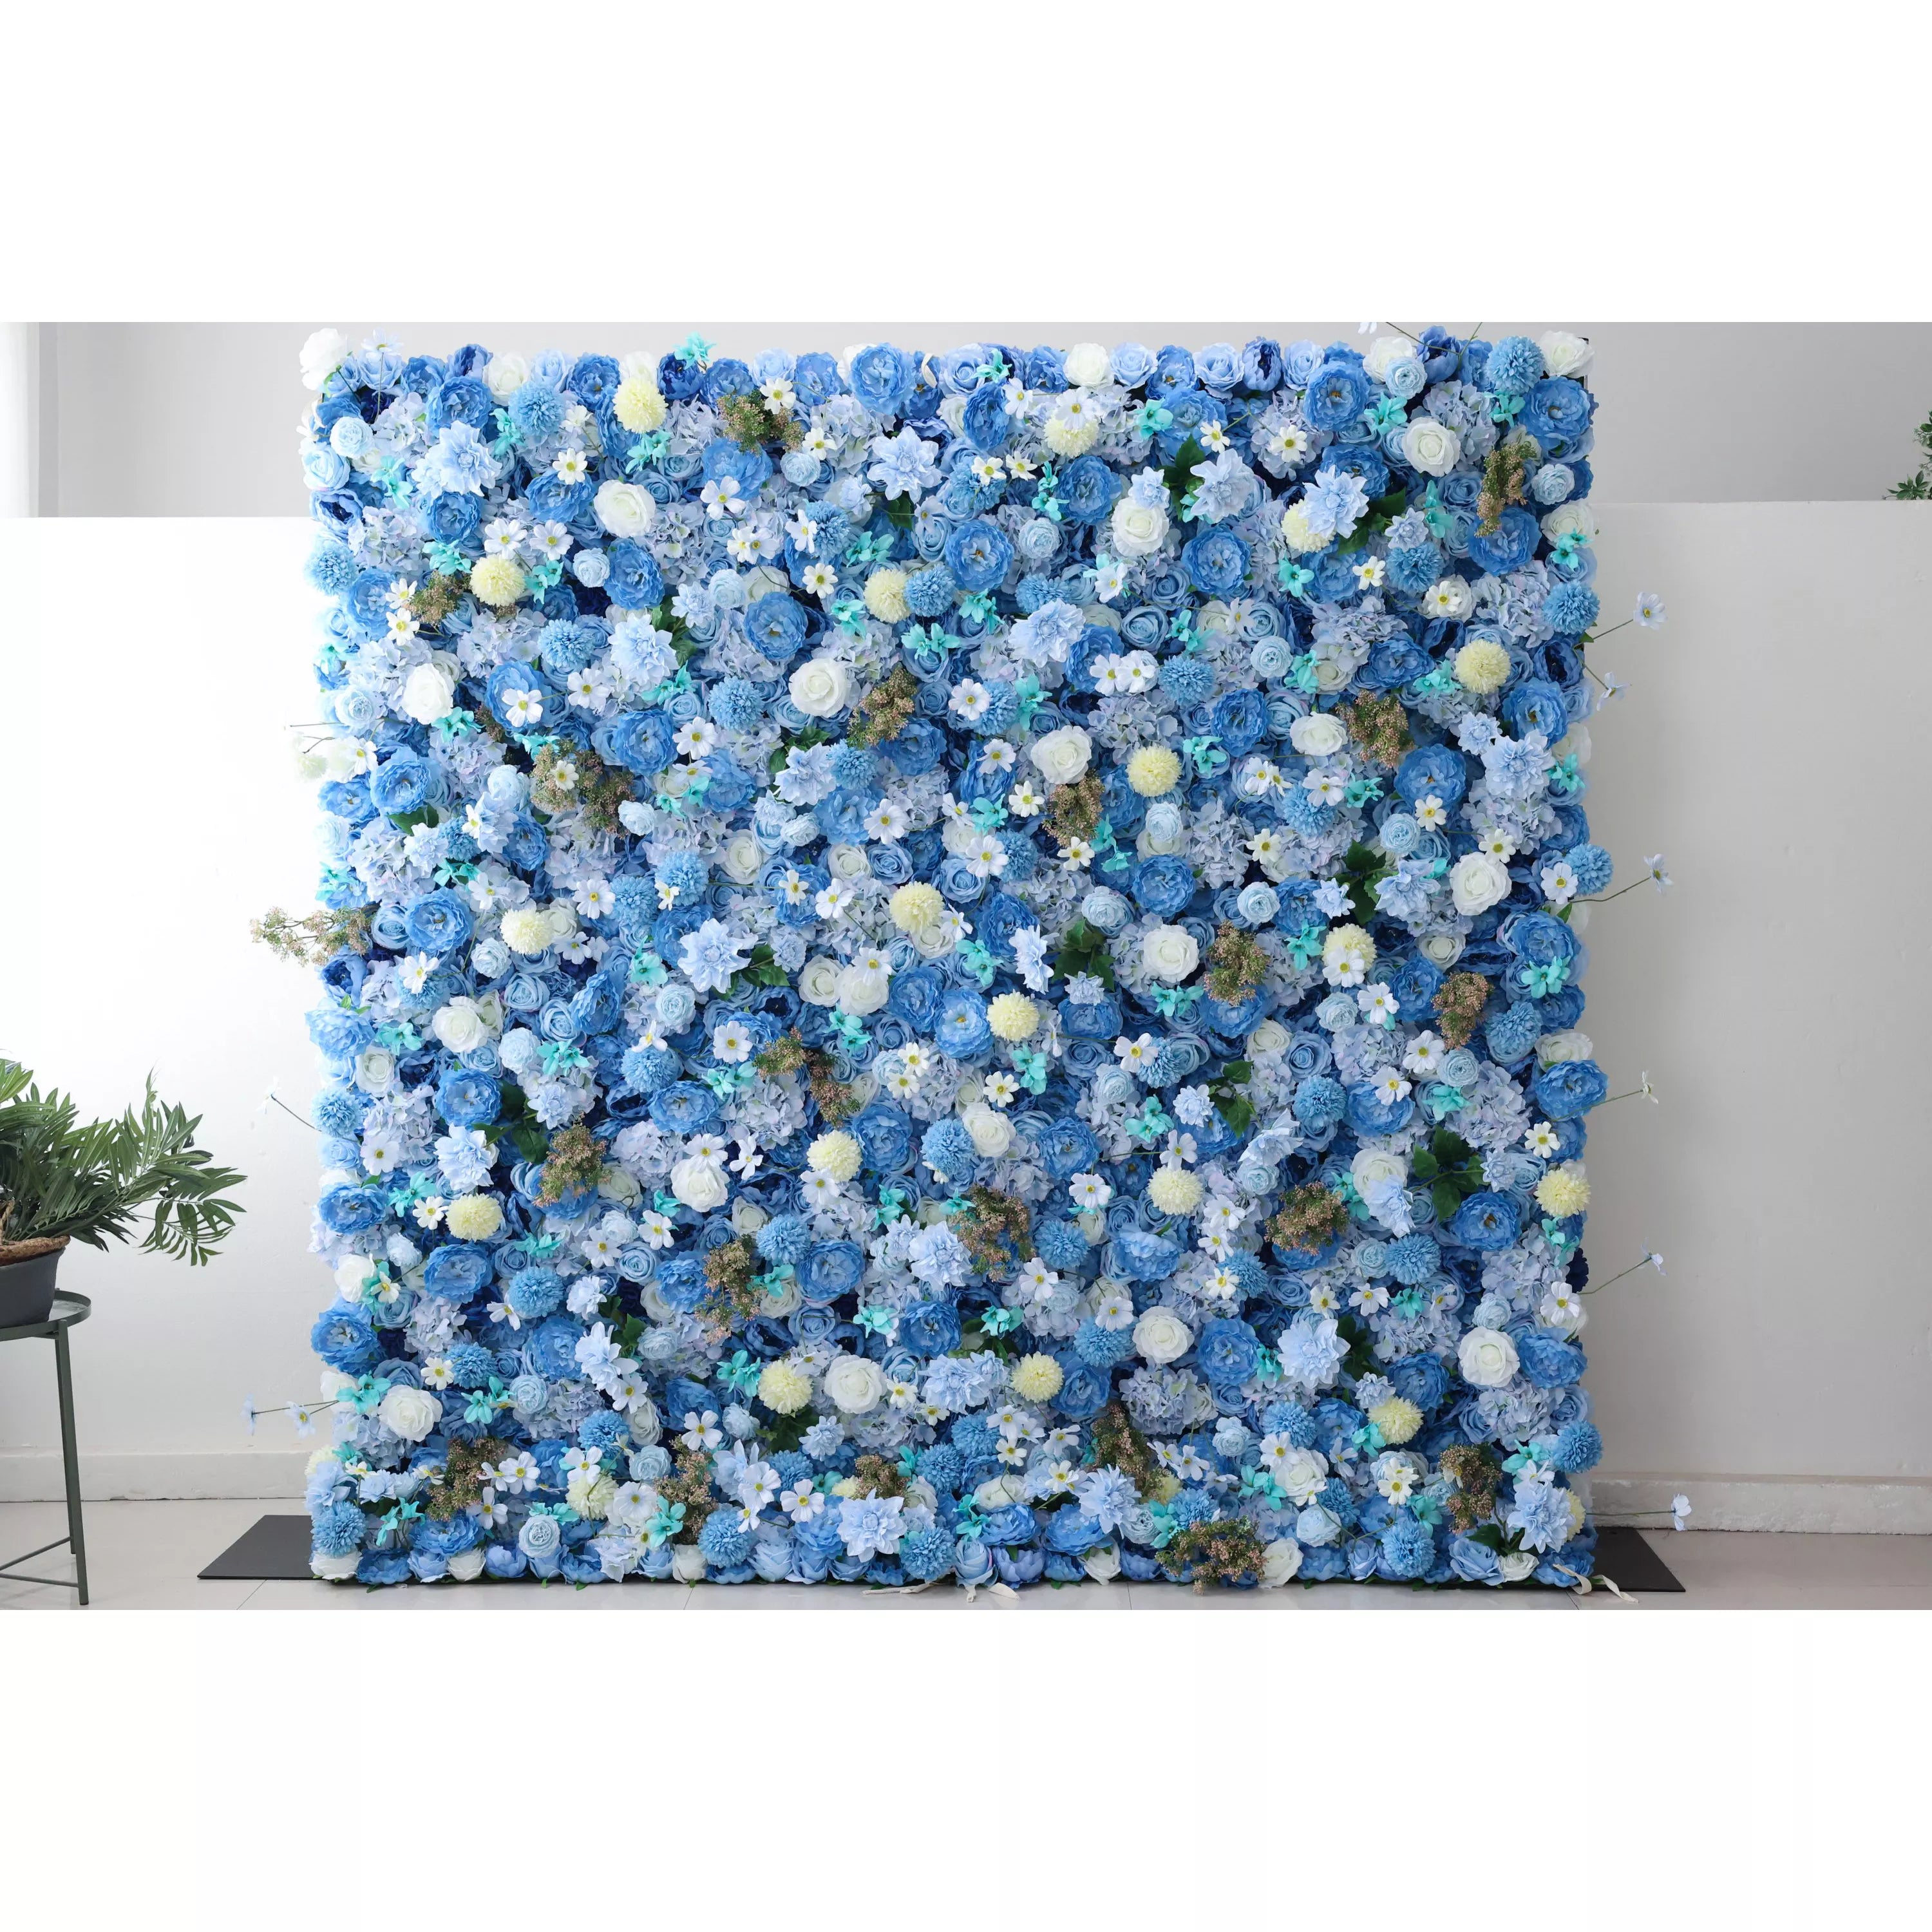 Valar Flowers Introduces: Azure Harmony – A Serene Symphony of Blue & Pale Yellow Fabric Blooms – Ideal Floral Wall for Nautical Themes, Events & Tranquil Interior Ambiances-VF-219-2